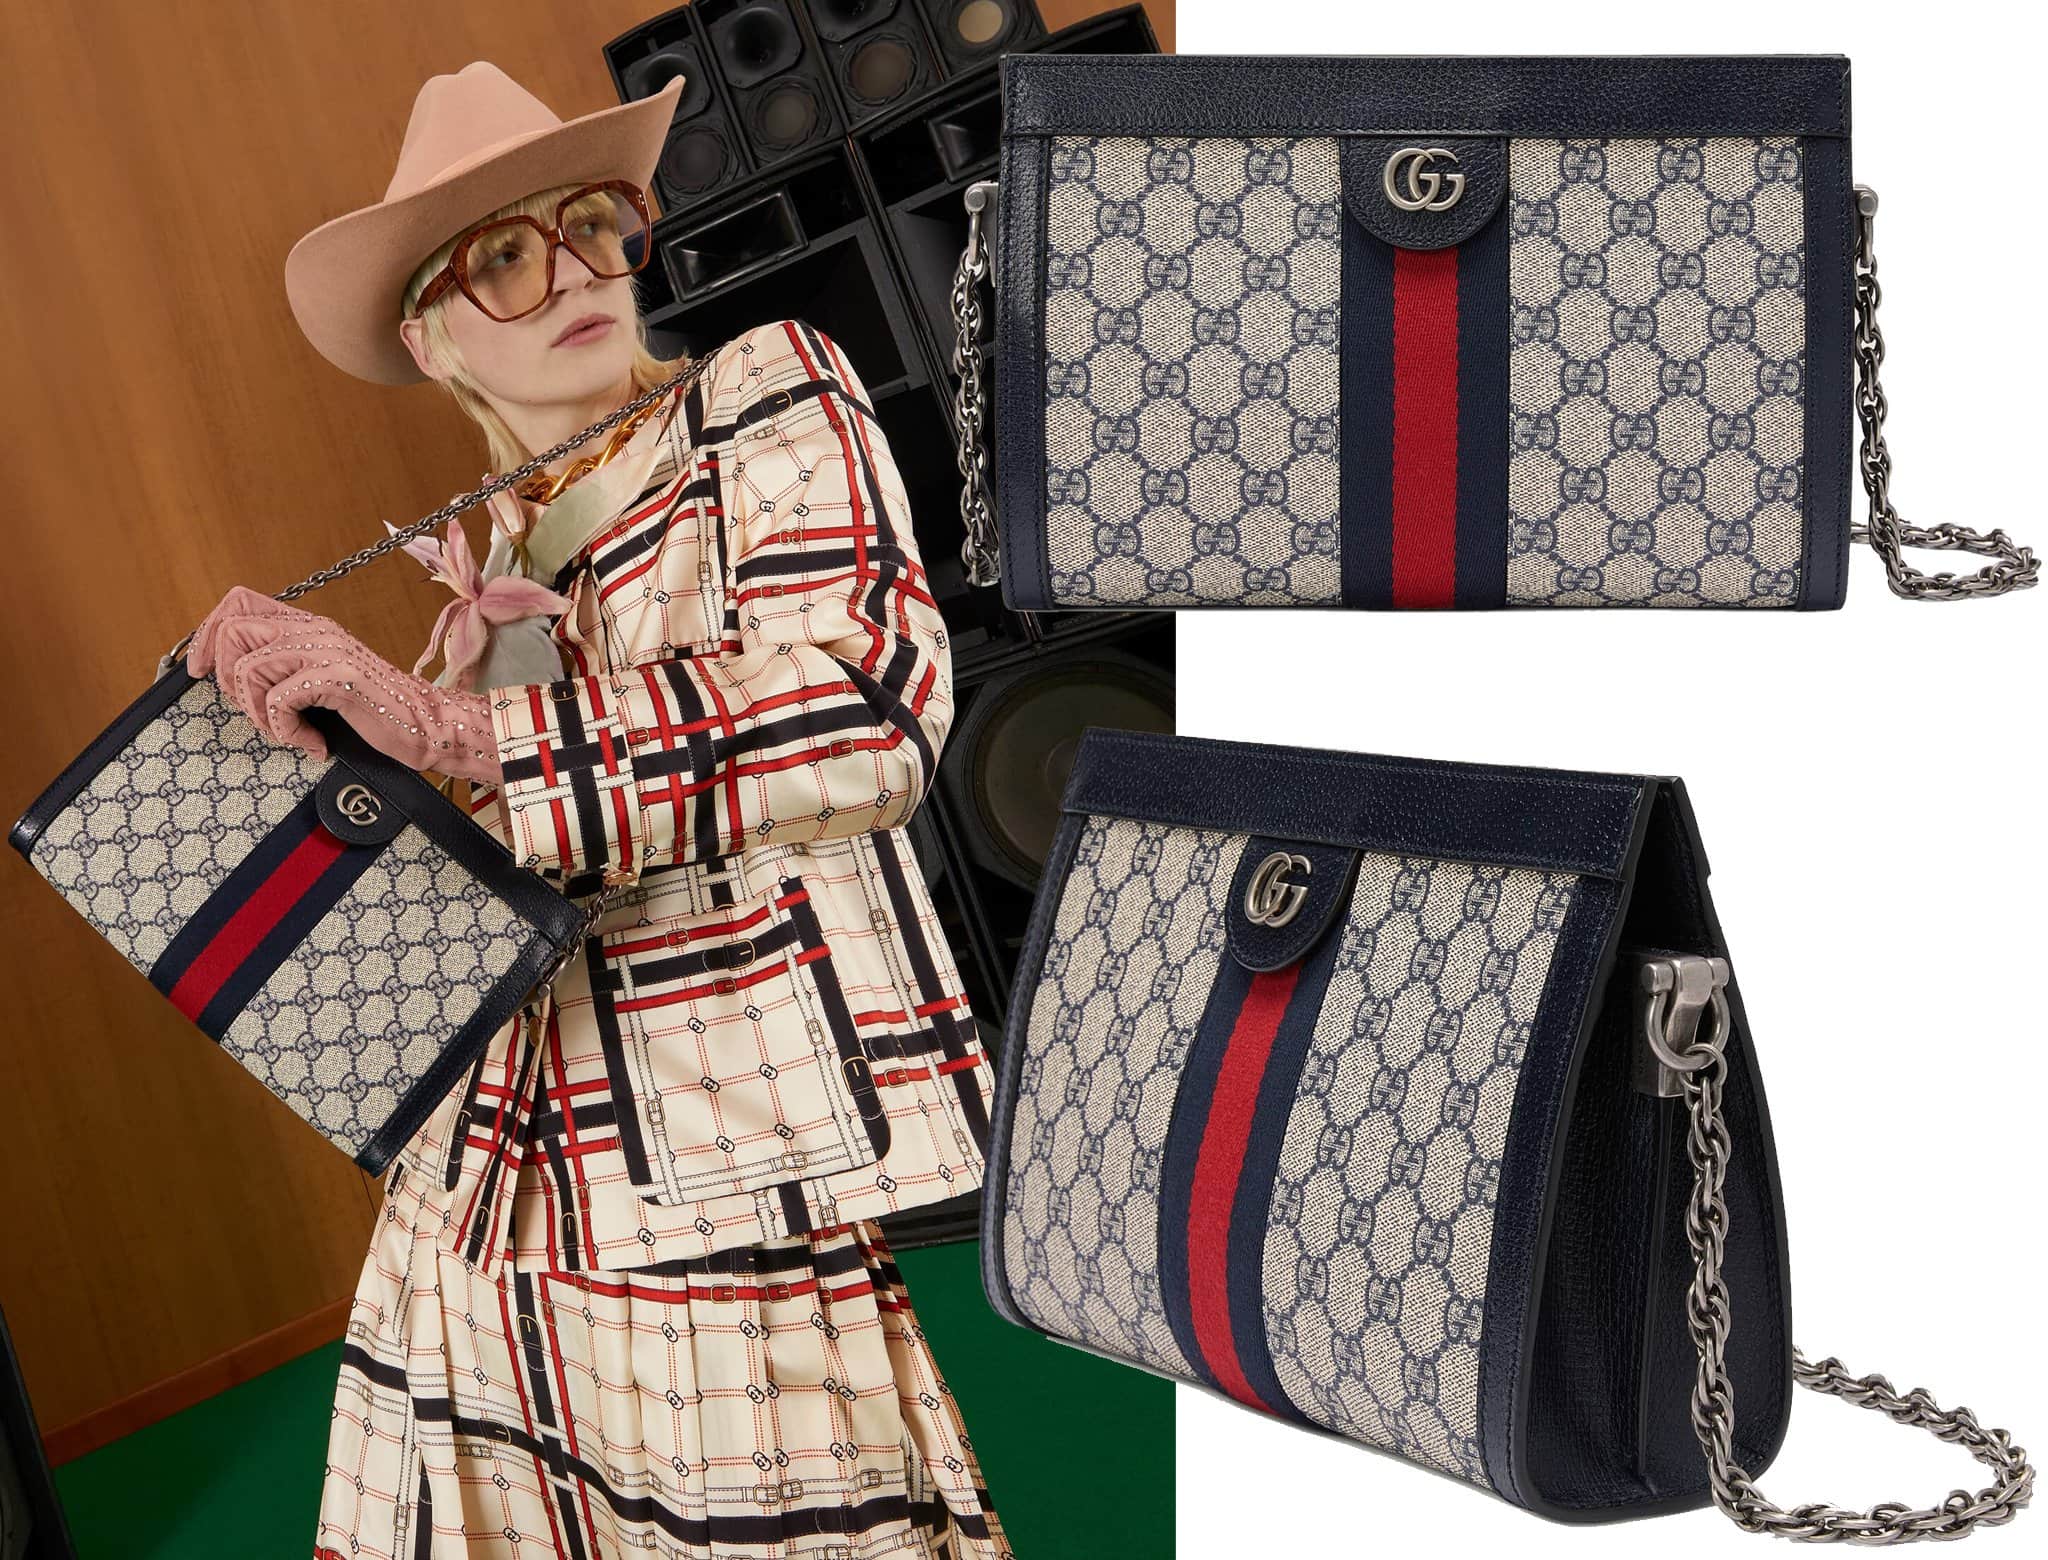 The Ophidia GG features the GG Supreme canvas in a mix of blue and beige for Gucci Love Parade